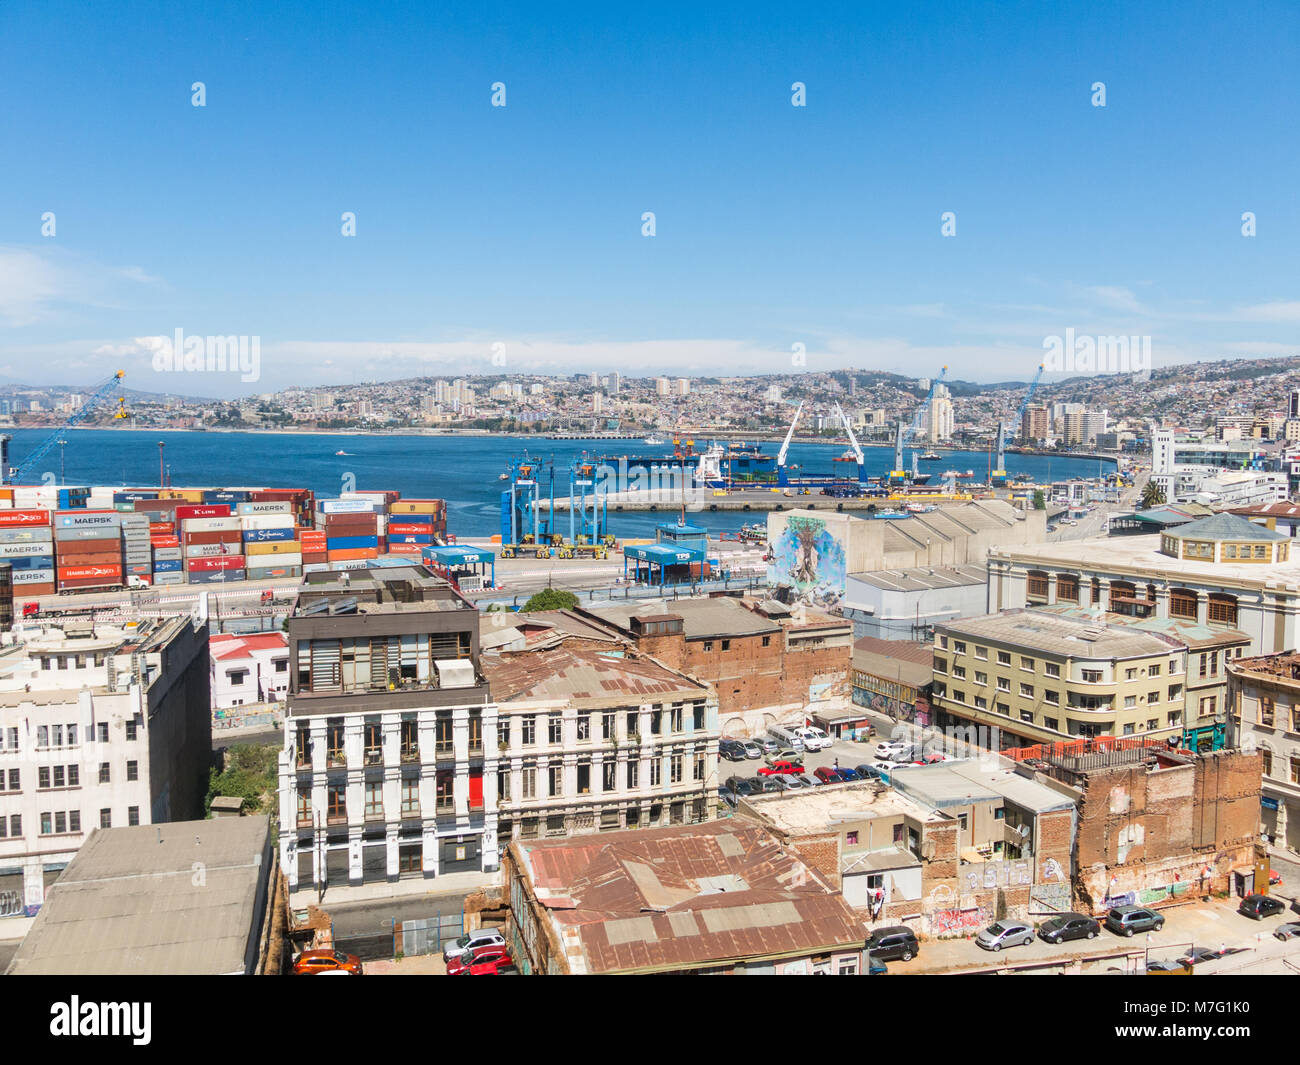 VALPARAISO, CHILE- JANUARY 2, 2018: The busy cargo seaport in South America in Valparaiso, Chile. It is the most important seaport in Chile. Stock Photo